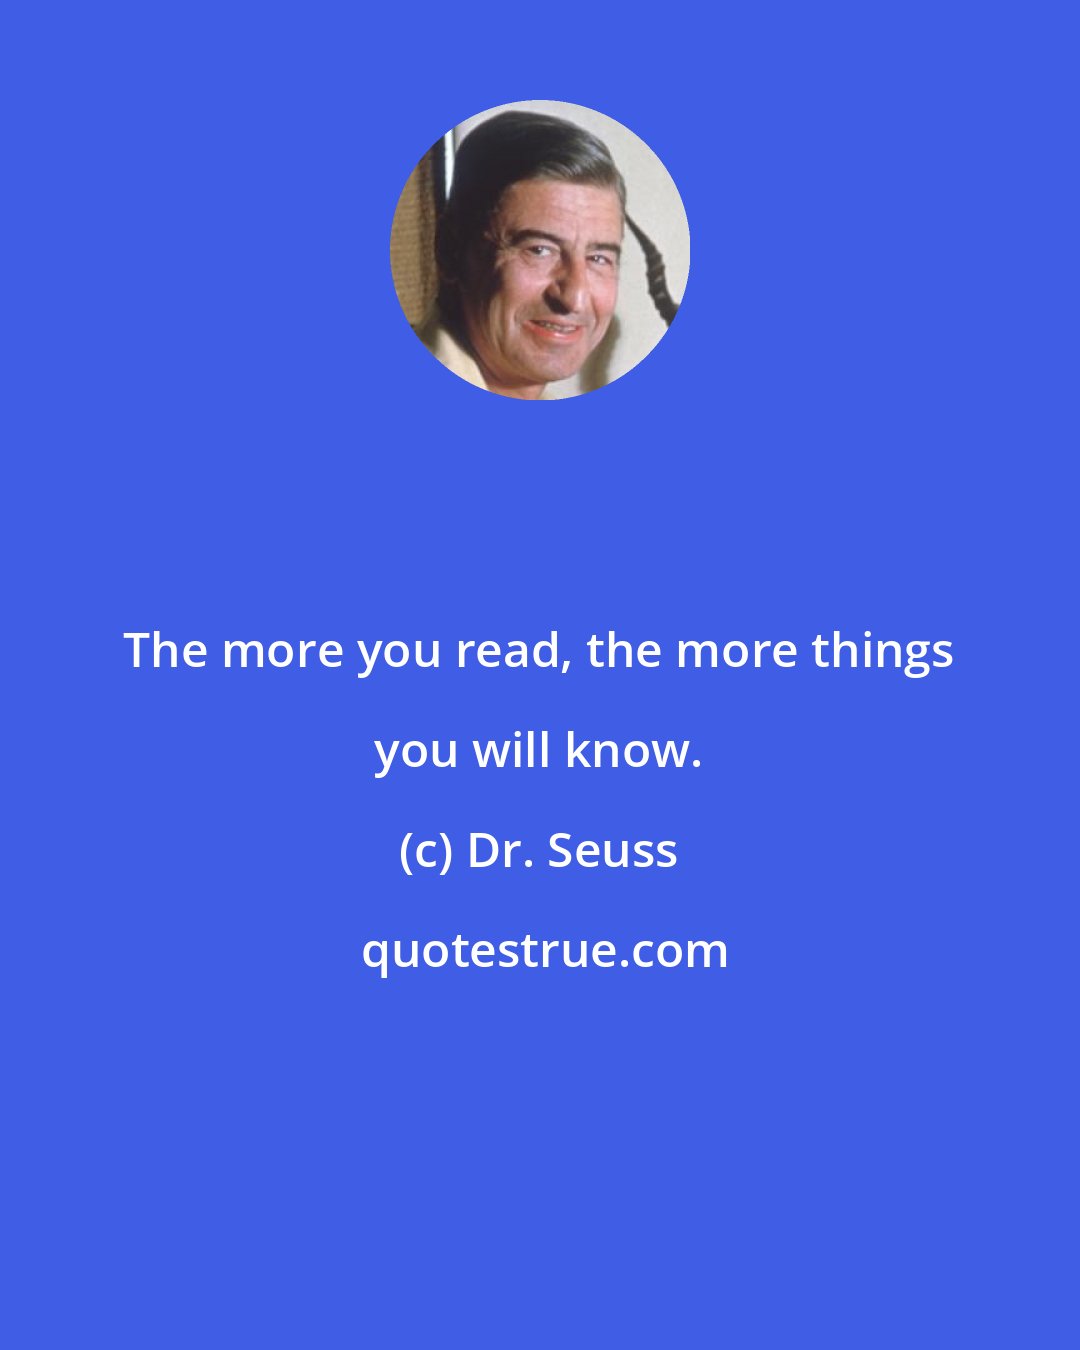 Dr. Seuss: The more you read, the more things you will know.